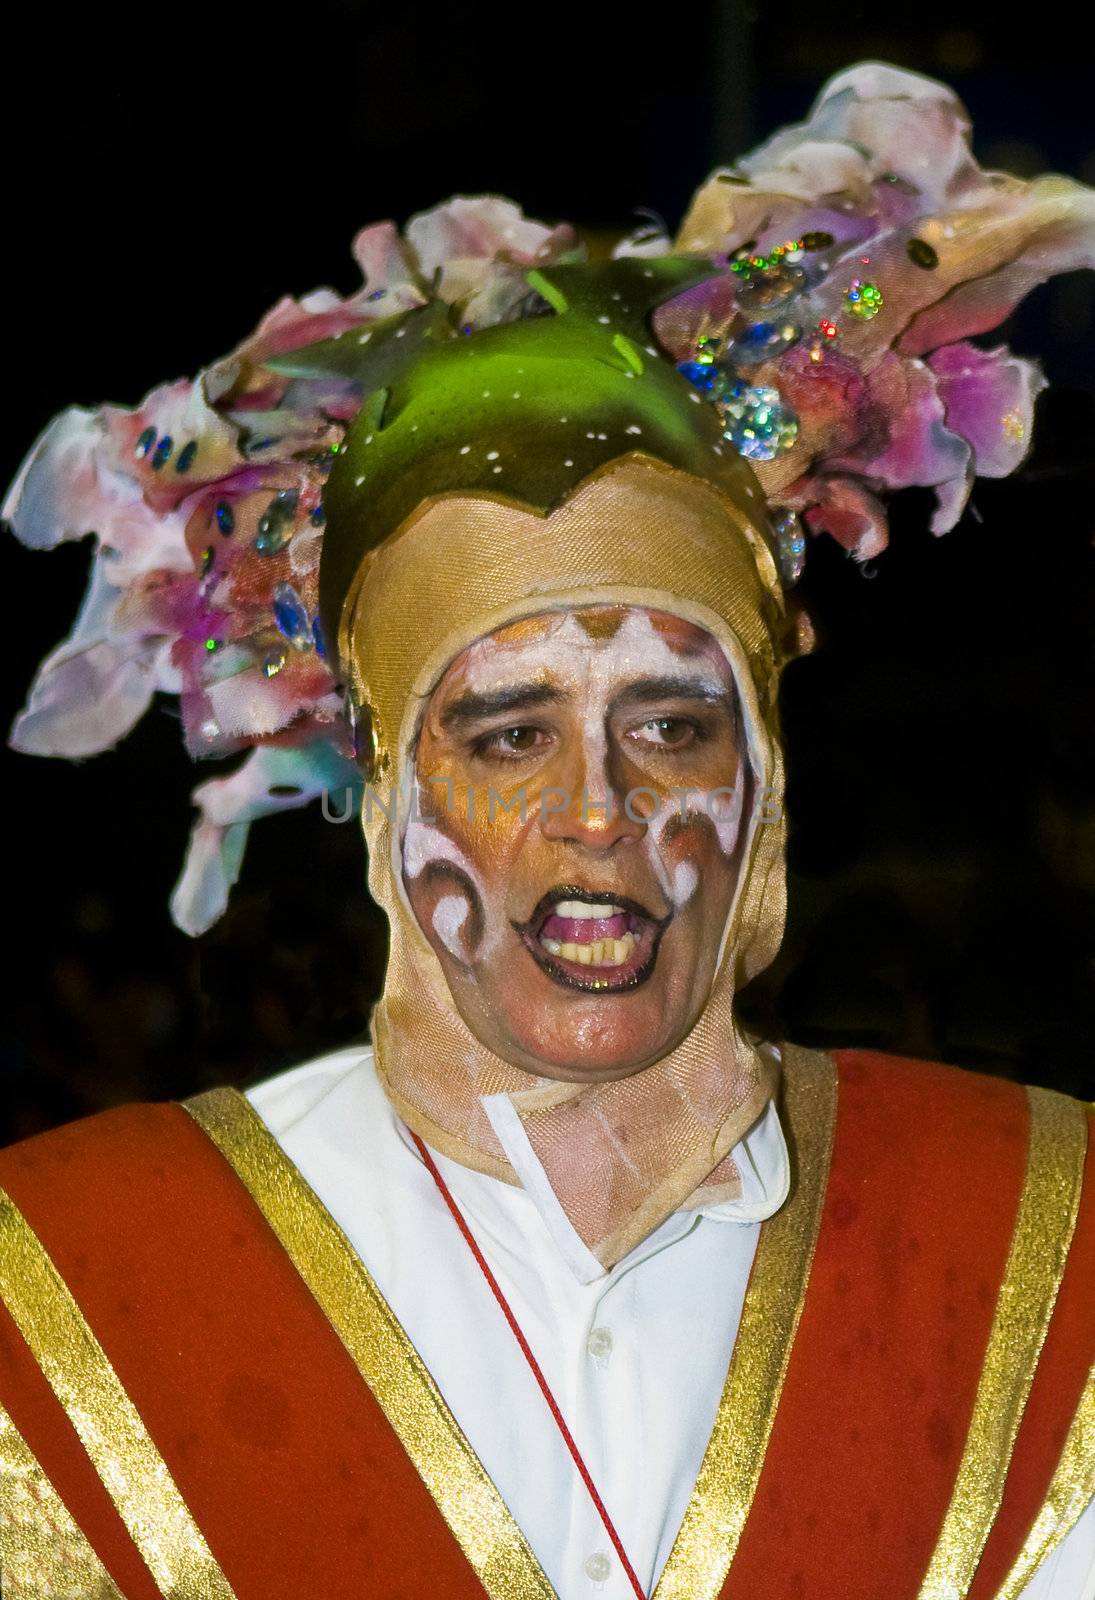 MONTEVIDEO, URUGUAY - JANUARY 27 2011 : A costumed carnaval participant in the annual national festival of Uruguay ,held in Montevideo Uruguay on January 27 2011 